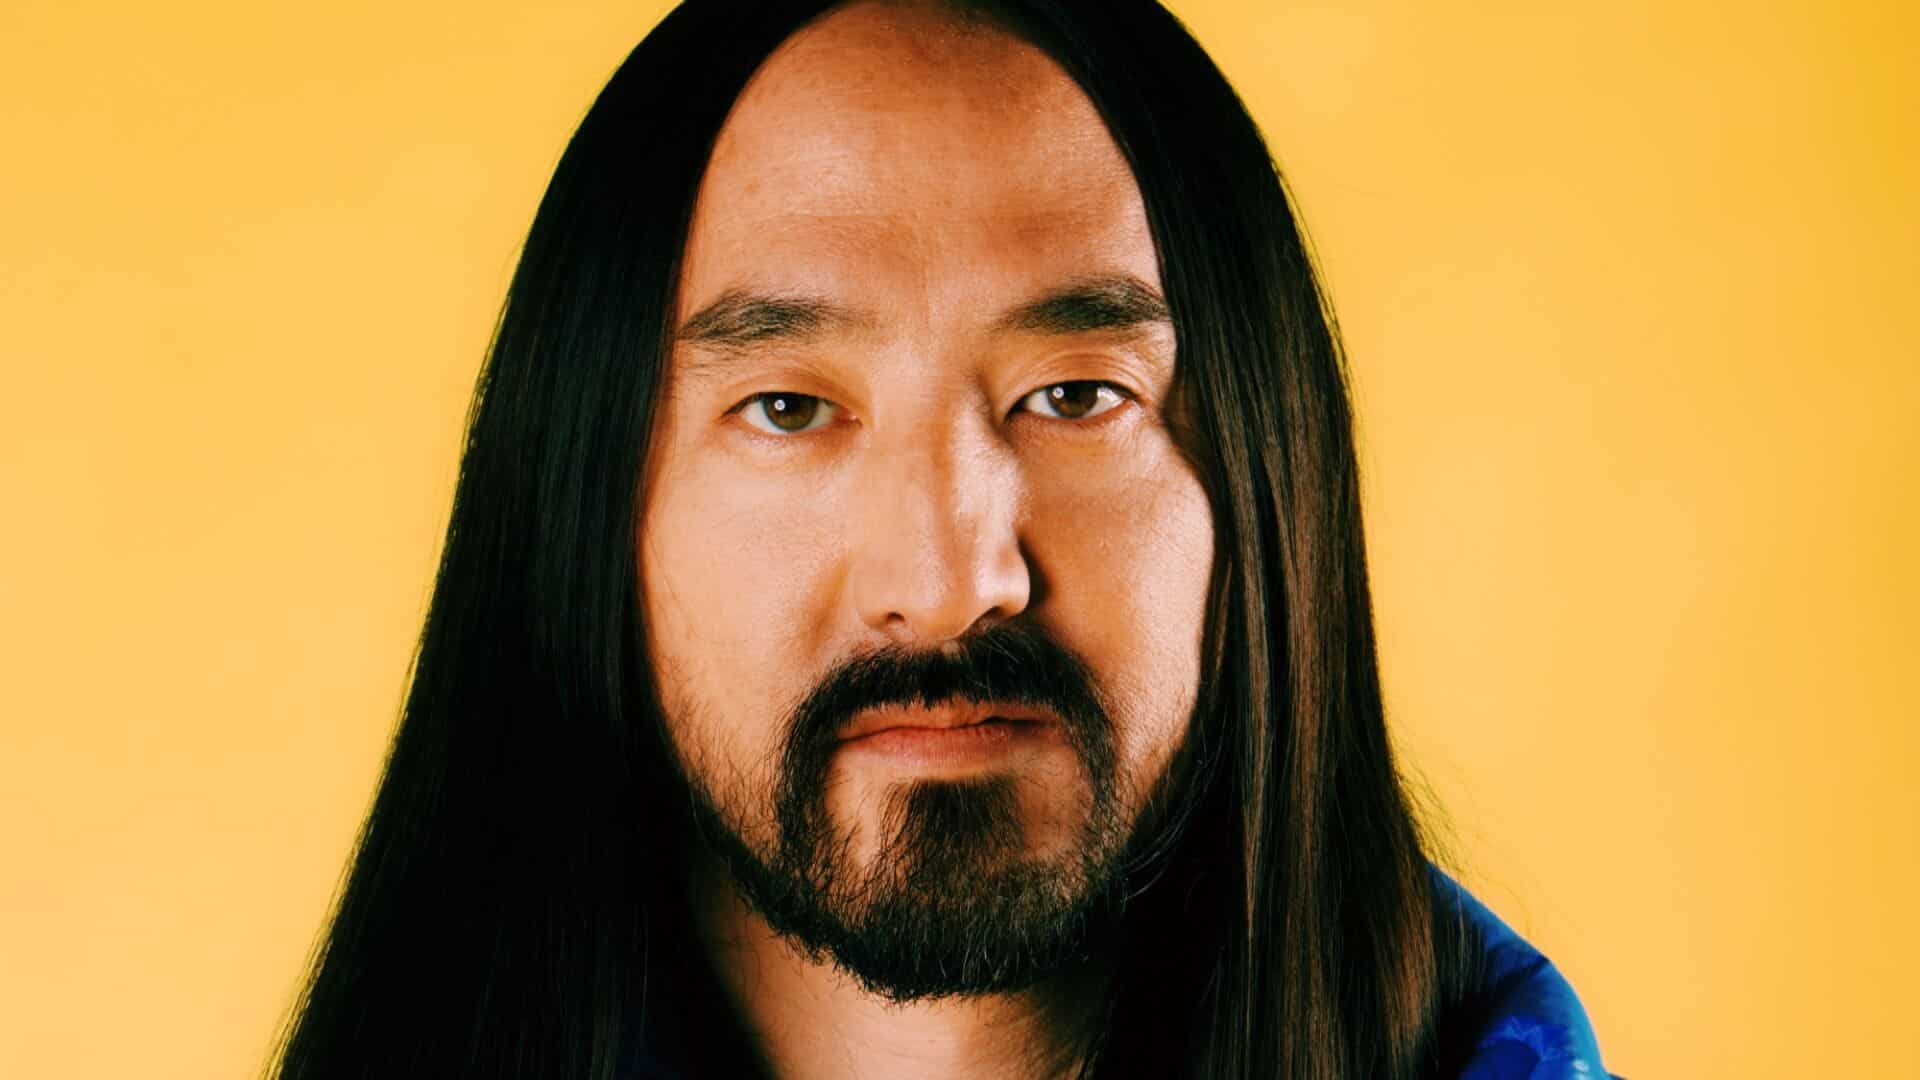 Steve Aoki is going to space with Elon Musk’s SpaceX